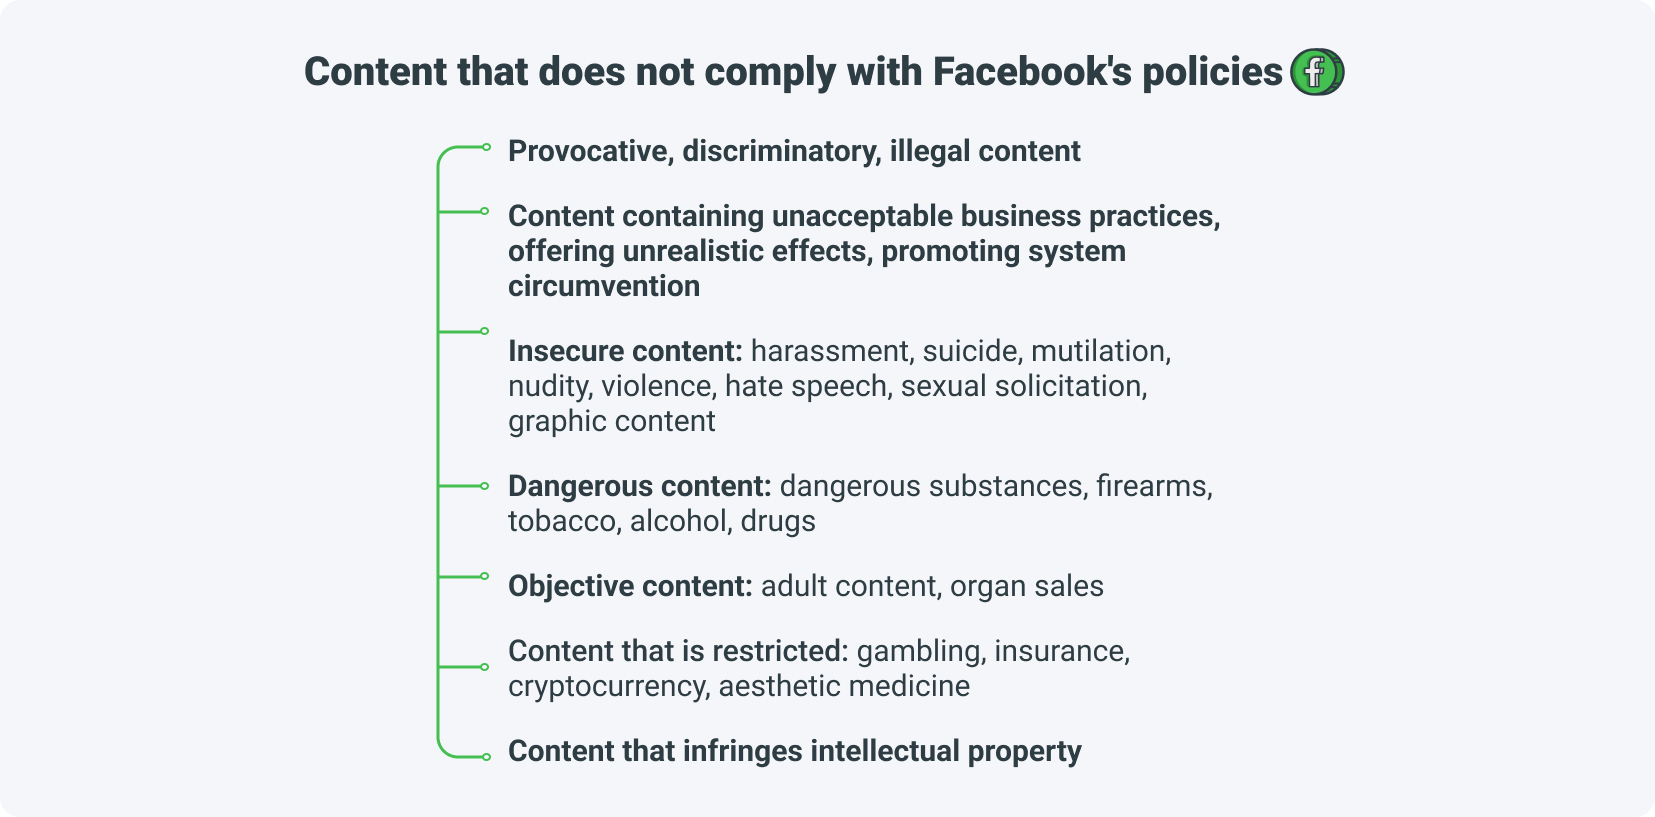 Content that does not comply with Facebook's policies